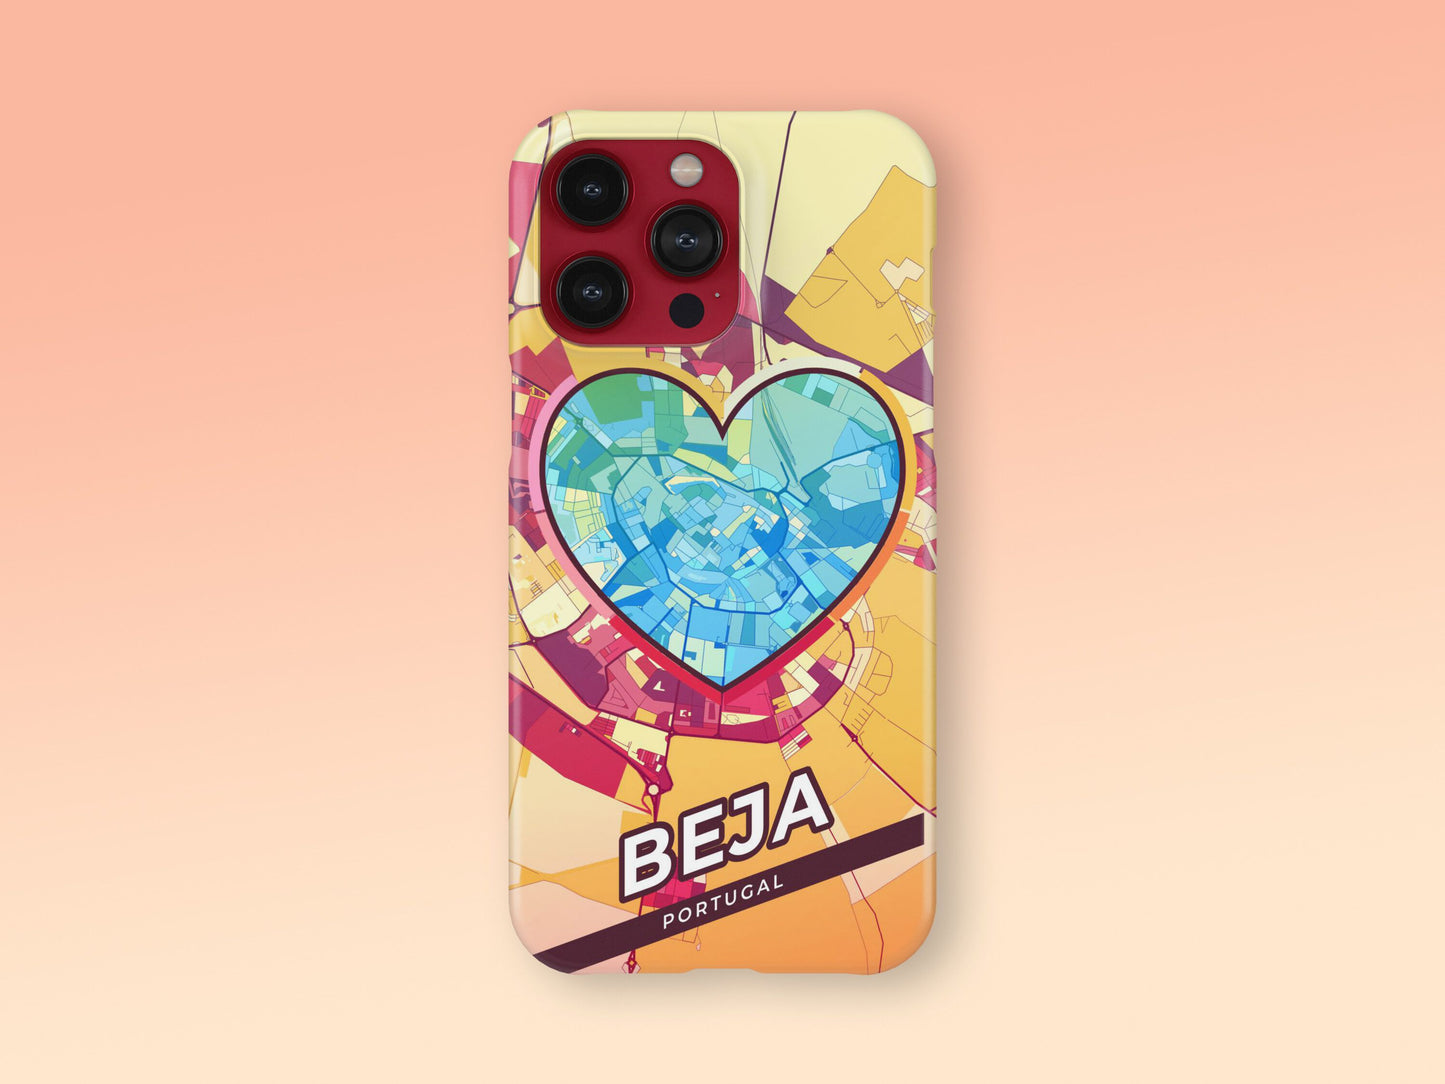 Beja Portugal slim phone case with colorful icon. Birthday, wedding or housewarming gift. Couple match cases. 2